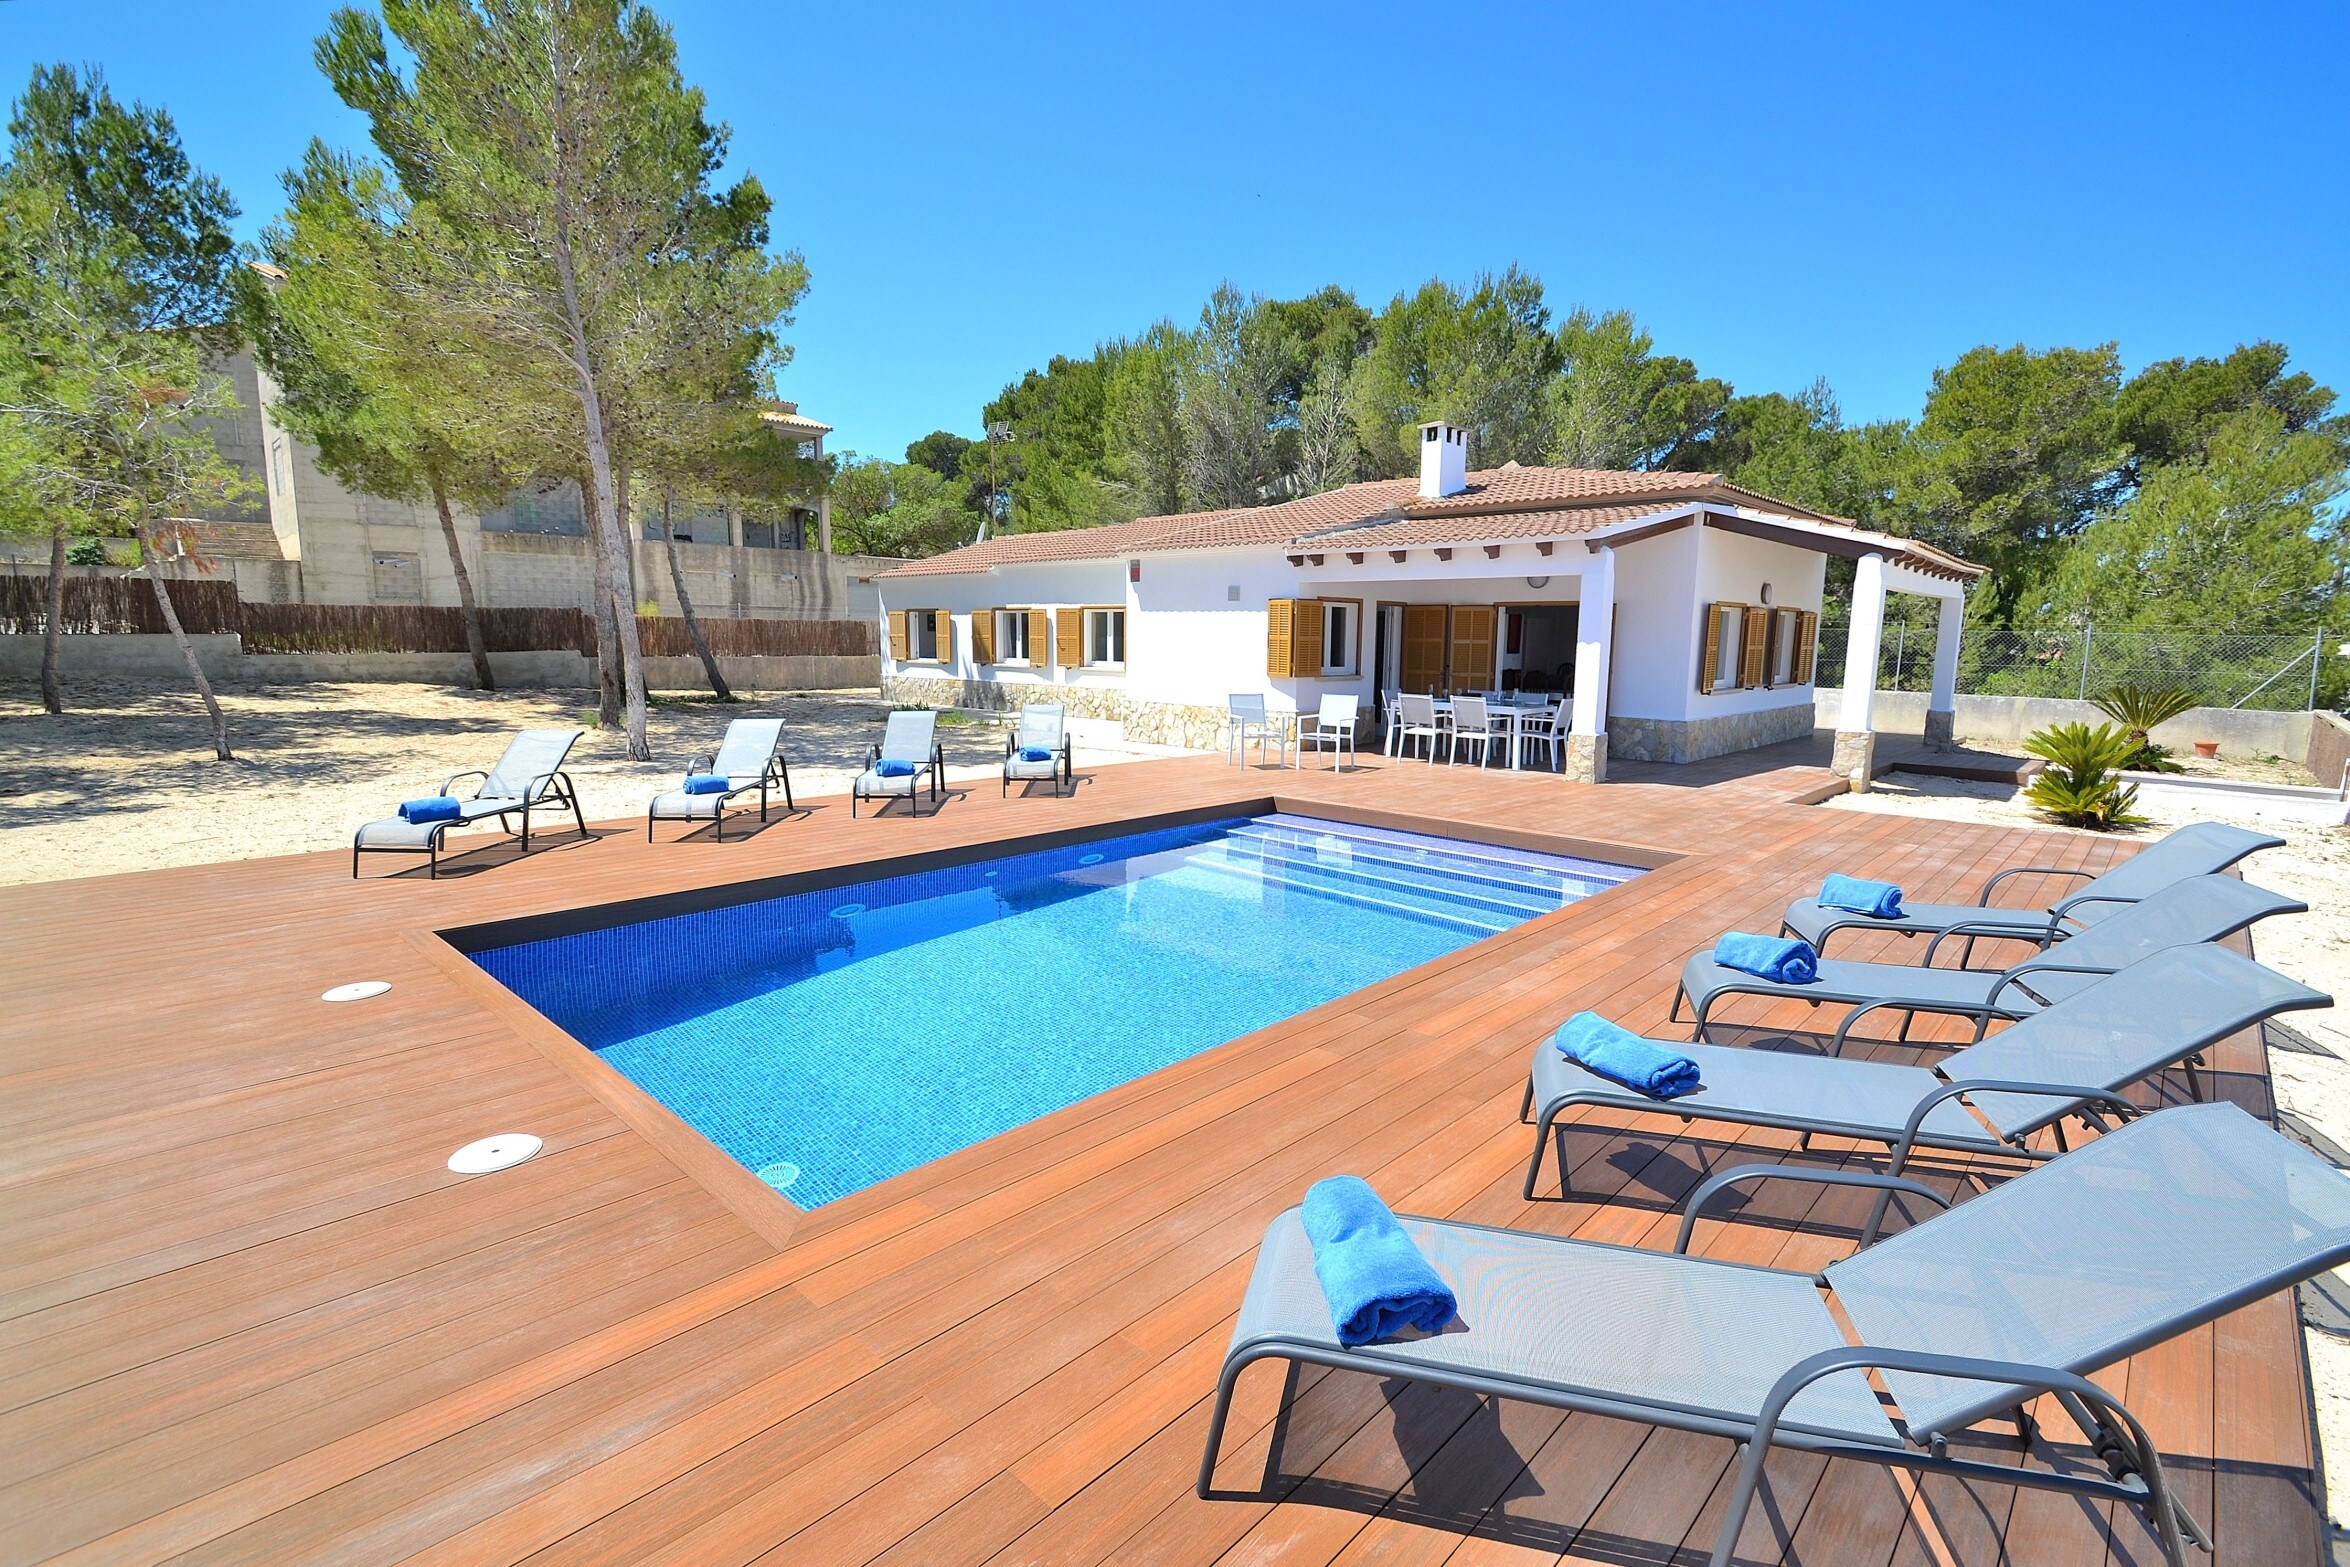 From 100 € per day you can rent your villa in Mallorca 